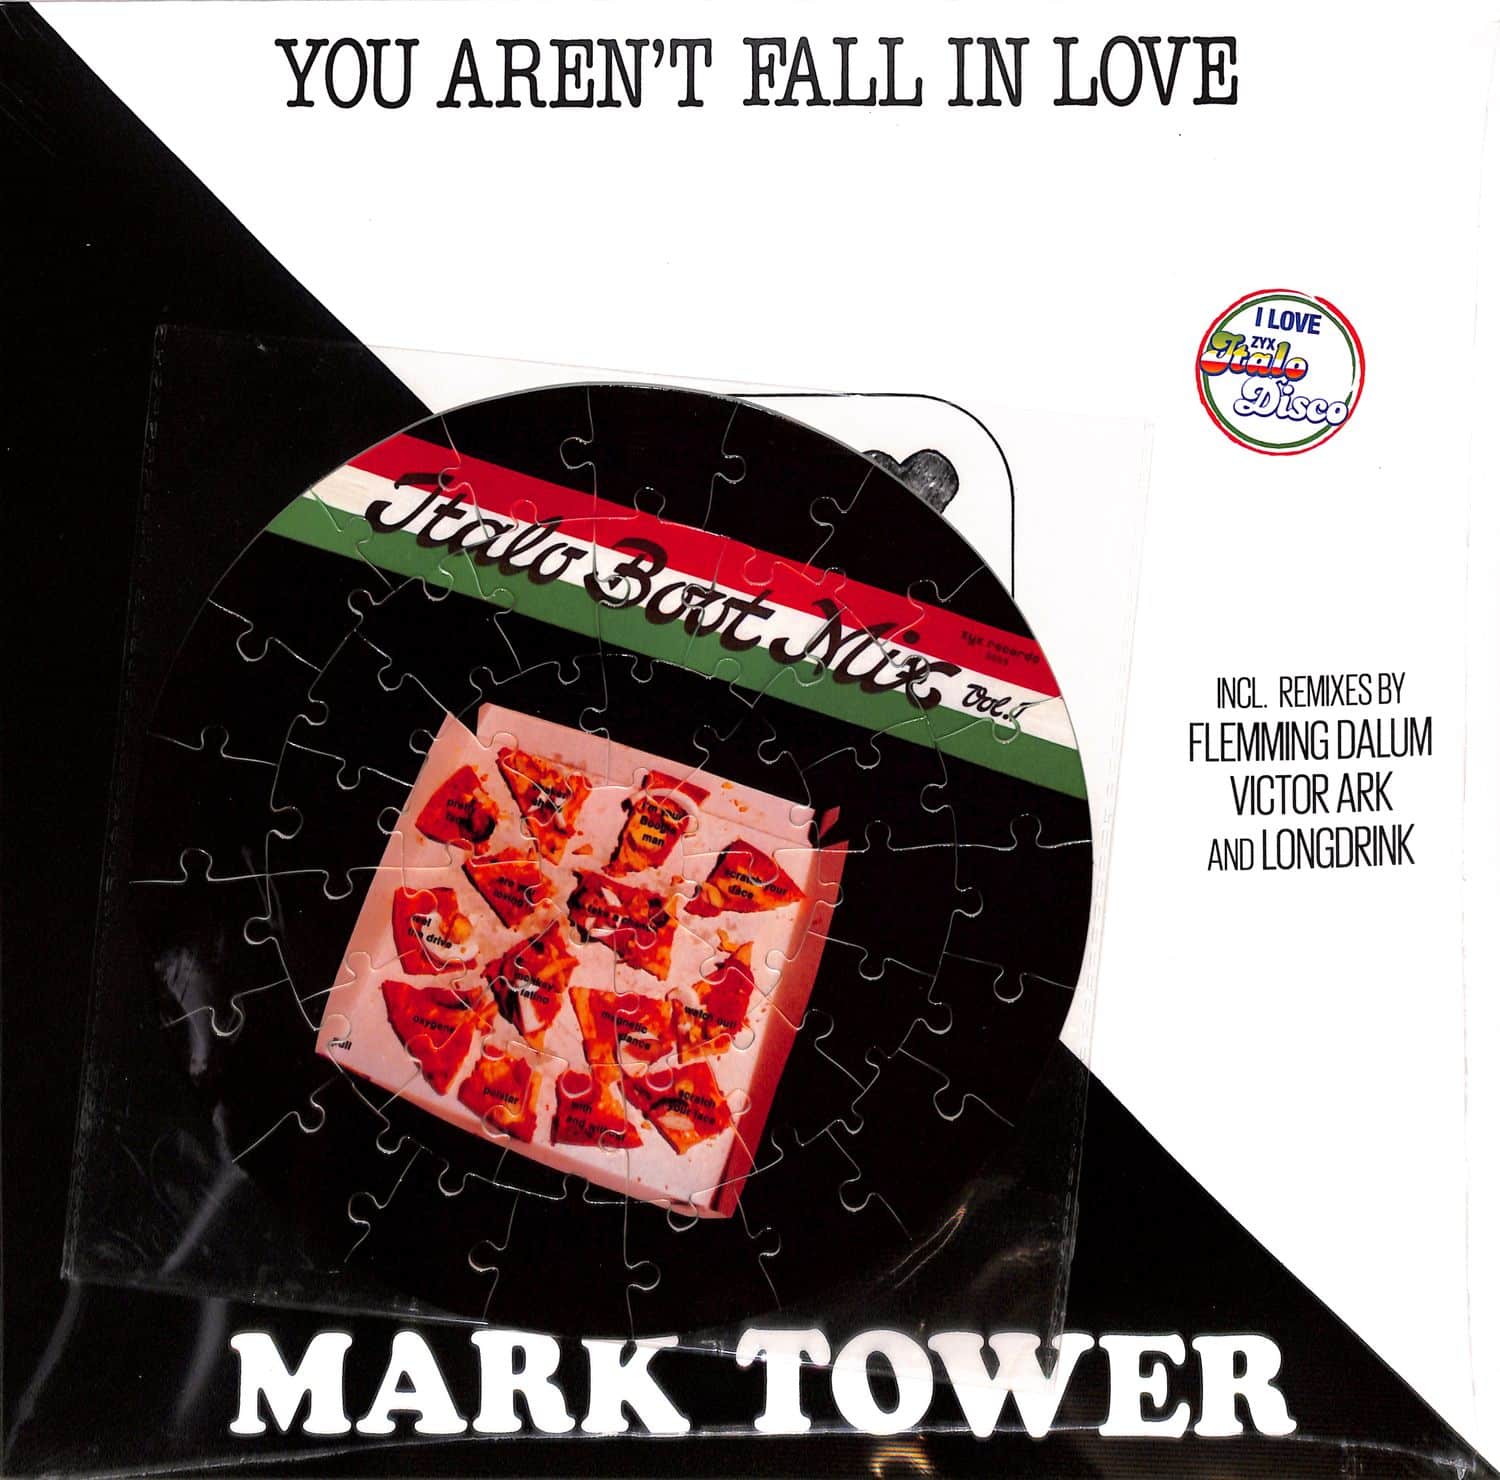 Mark Tower - YOU ARENT FALL IN LOVE 